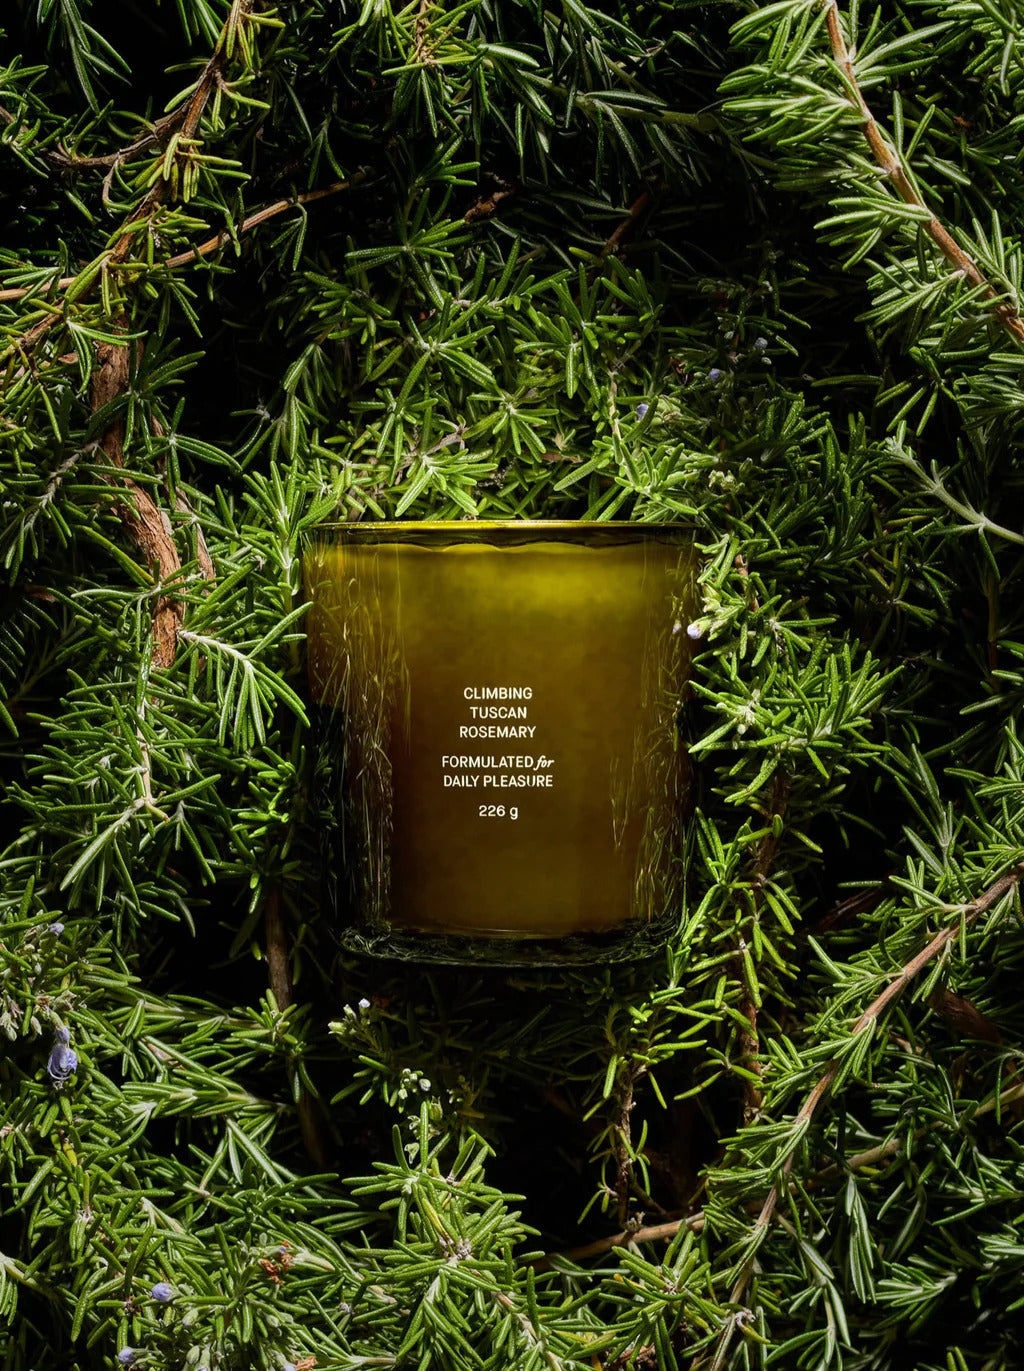 Flamingo Estate Candles - Climbing Tuscan Rosemary on a bed of rosmary.